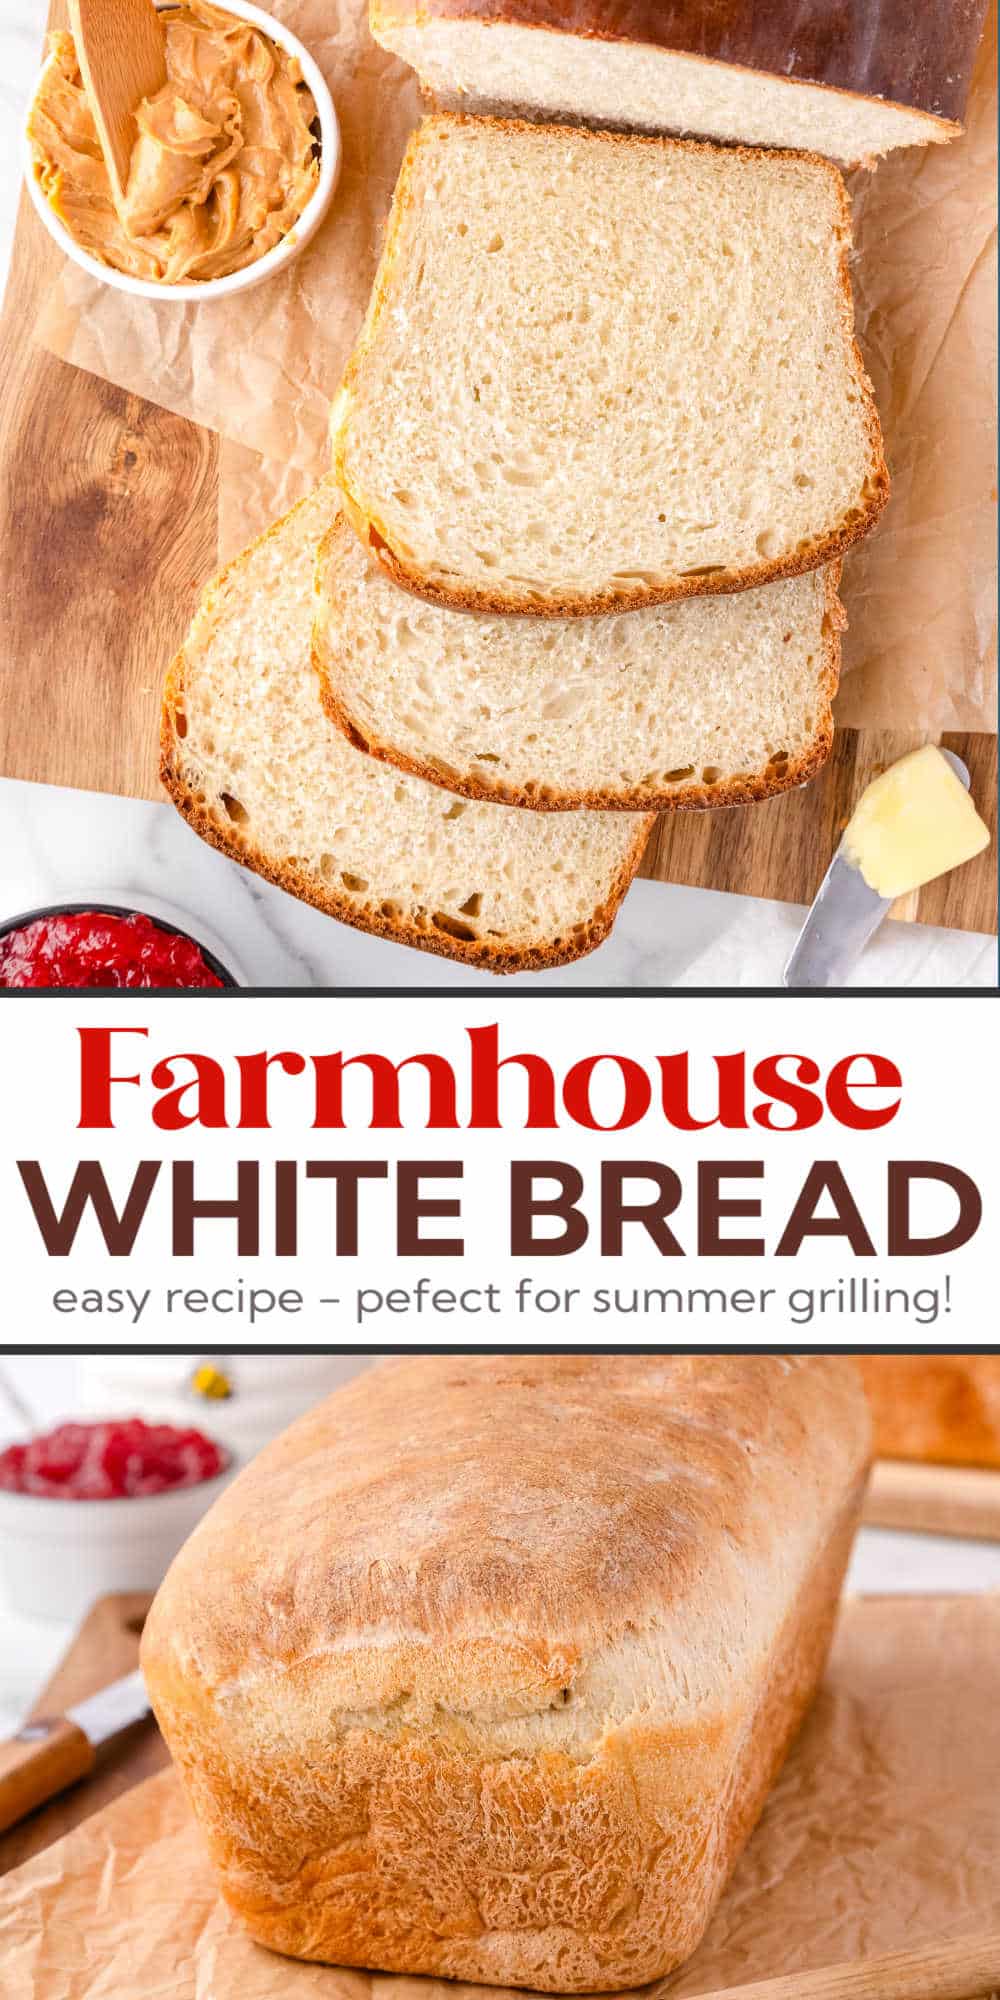 Farmhouse Bread is easy to make and calls for just 6 simple ingredients. This homemade white bread recipe makes 2 large fluffy loaves. via @foodfolksandfun